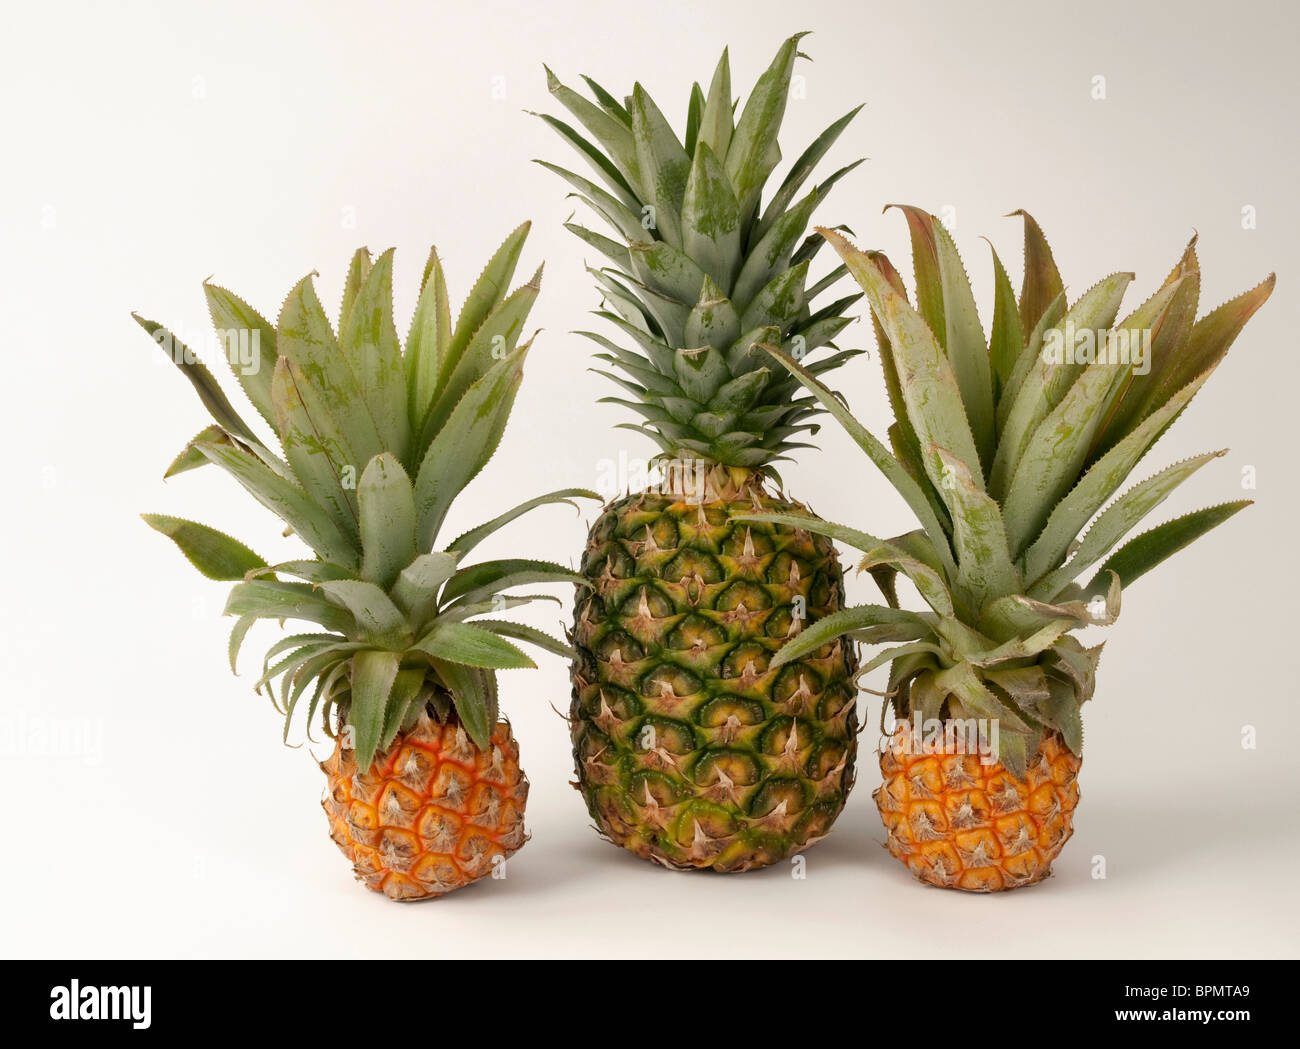 Pineapple (Ananas comosus). Normal seized fruit and mini pineapples, studio  picture against a white background Stock Photo - Alamy